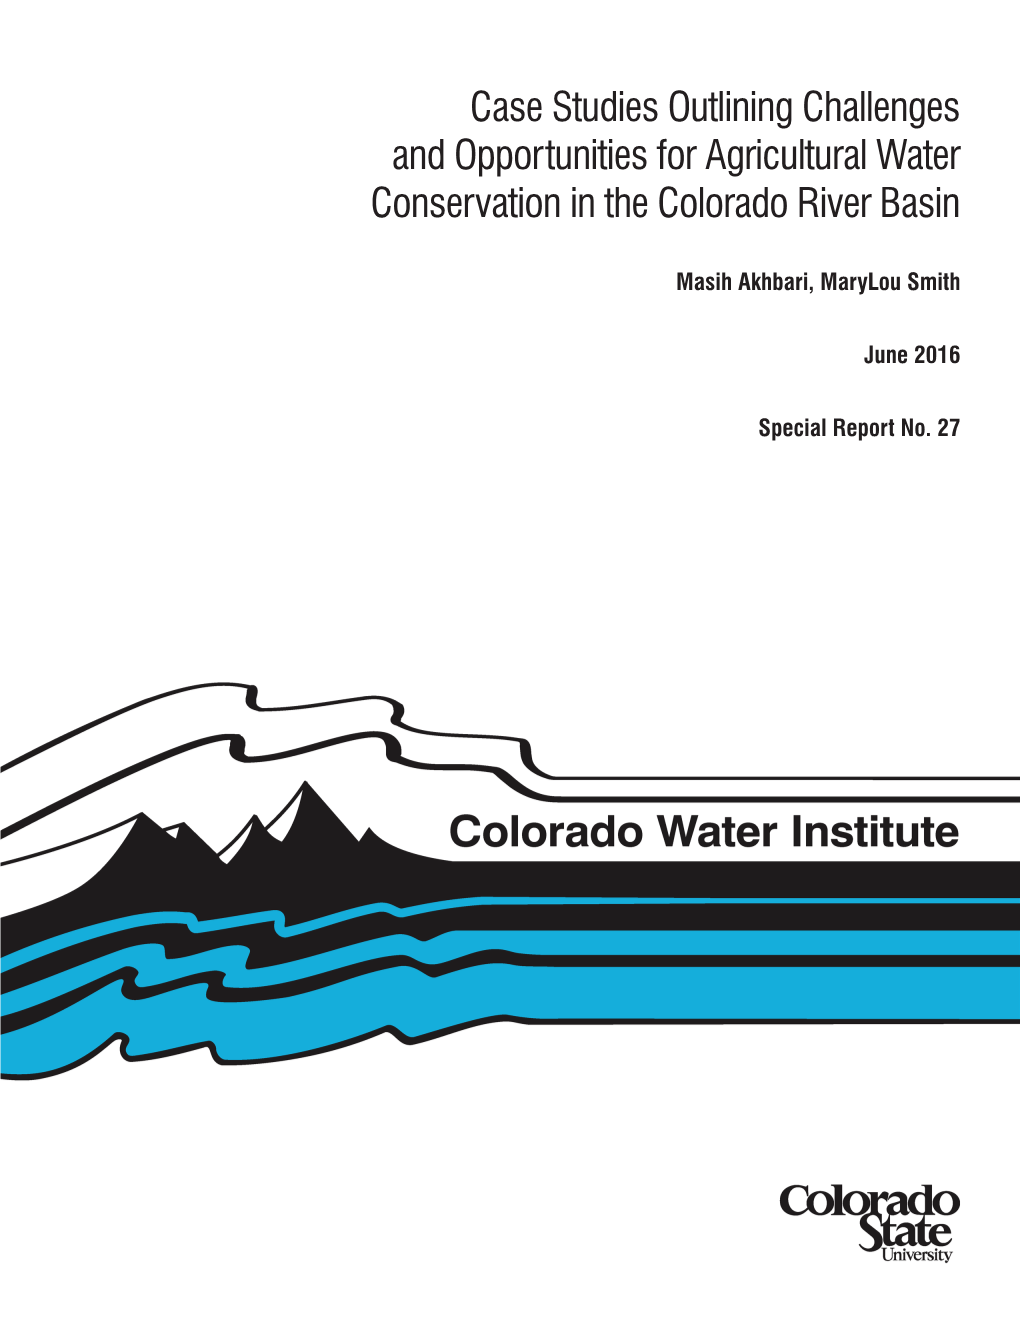 Case Studies Outlining Challenges and Opportunities for Agricultural Water Conservation in the Colorado River Basin